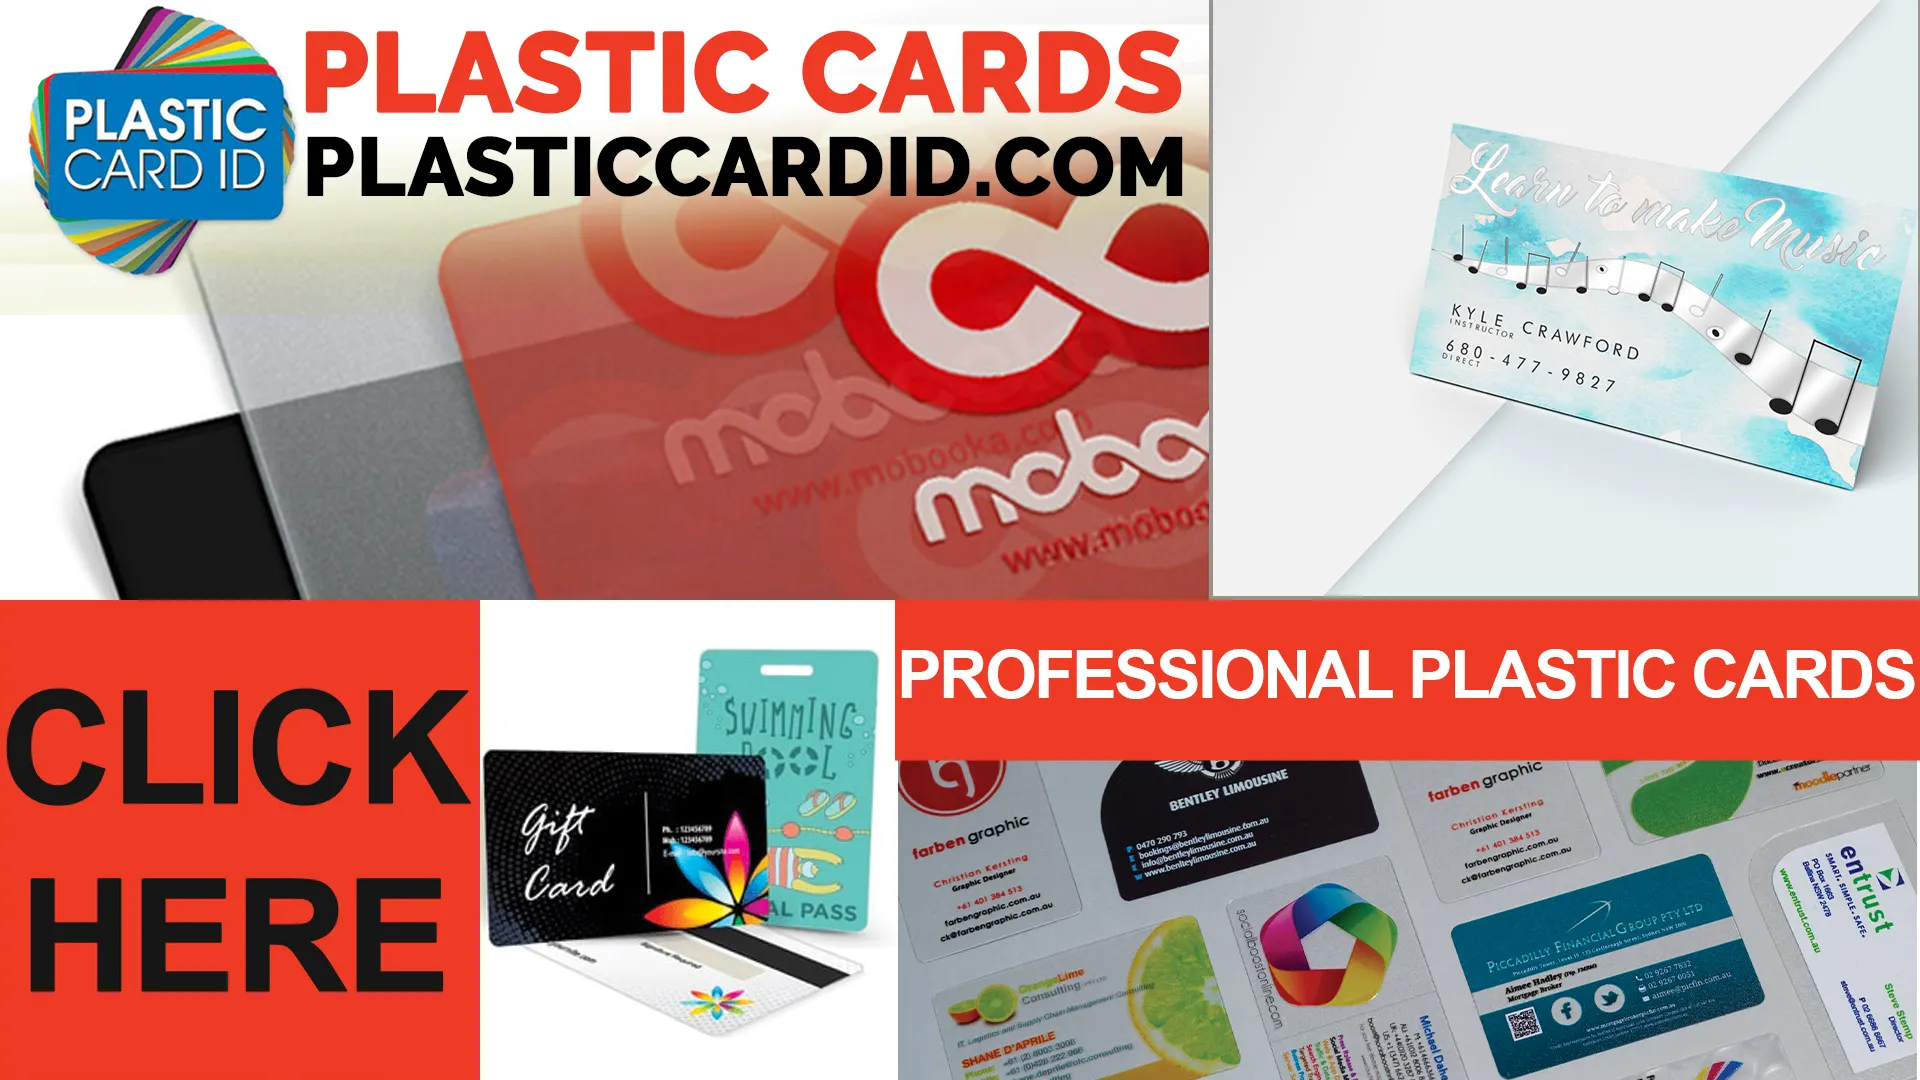 Creating Connections with Bespoke Plastic Cards